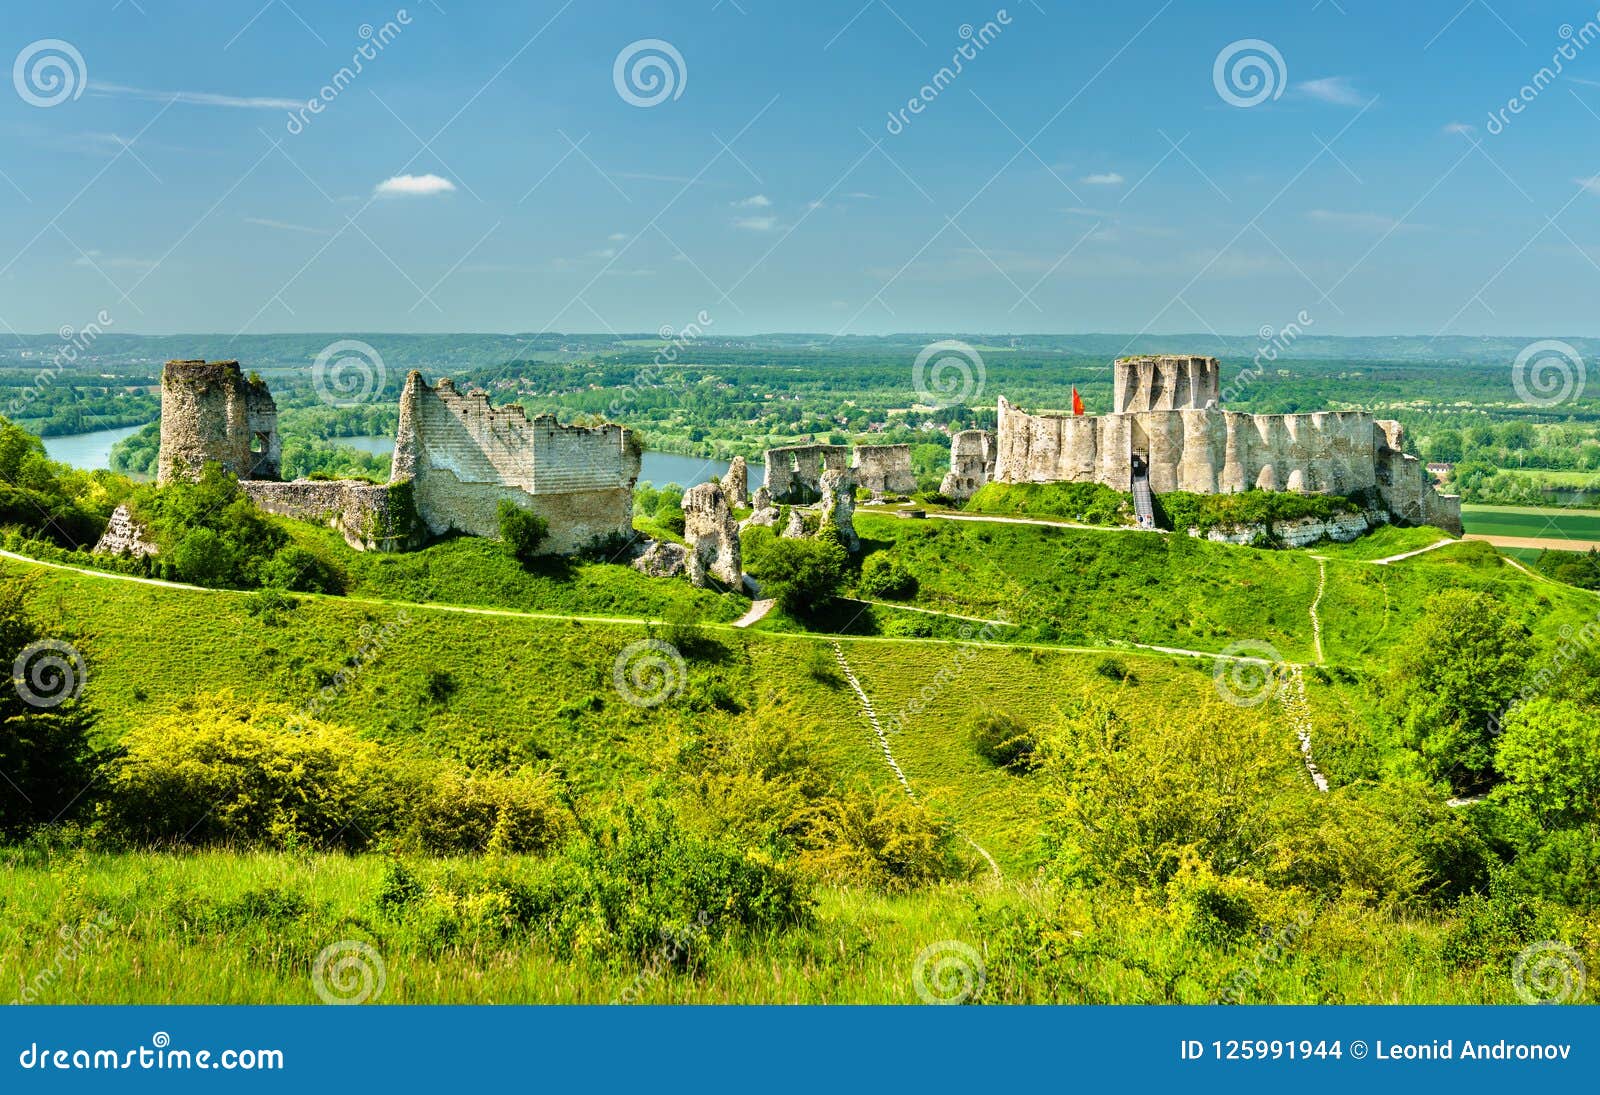 chateau gaillard, a ruined medieval castle in les andelys town - normandy, france